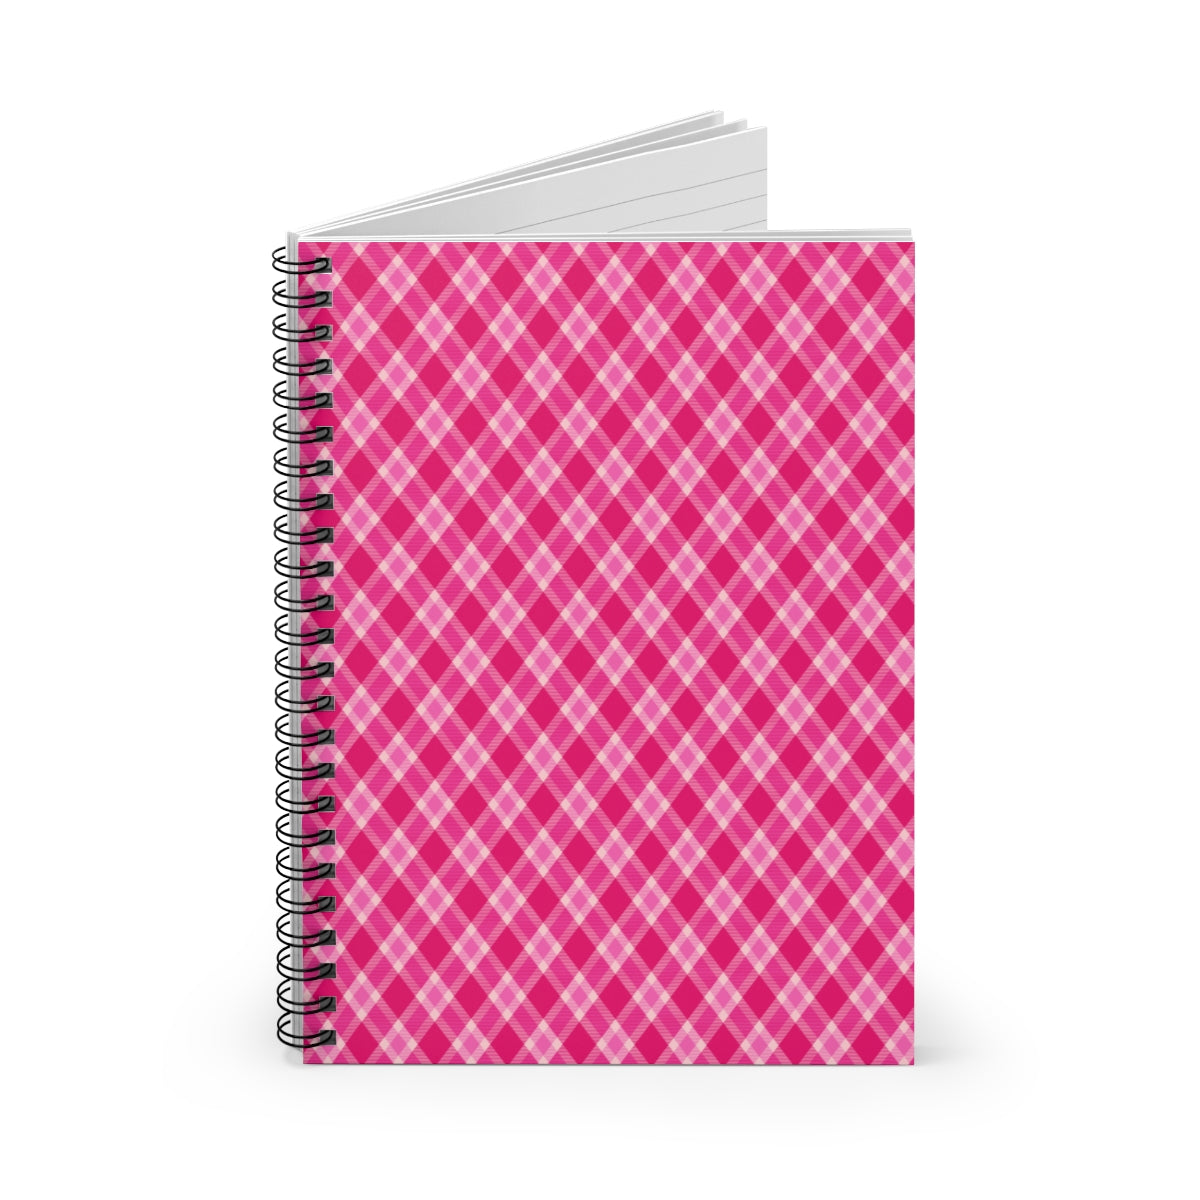 Pink Plaid Spiral Ruled Line Notebook